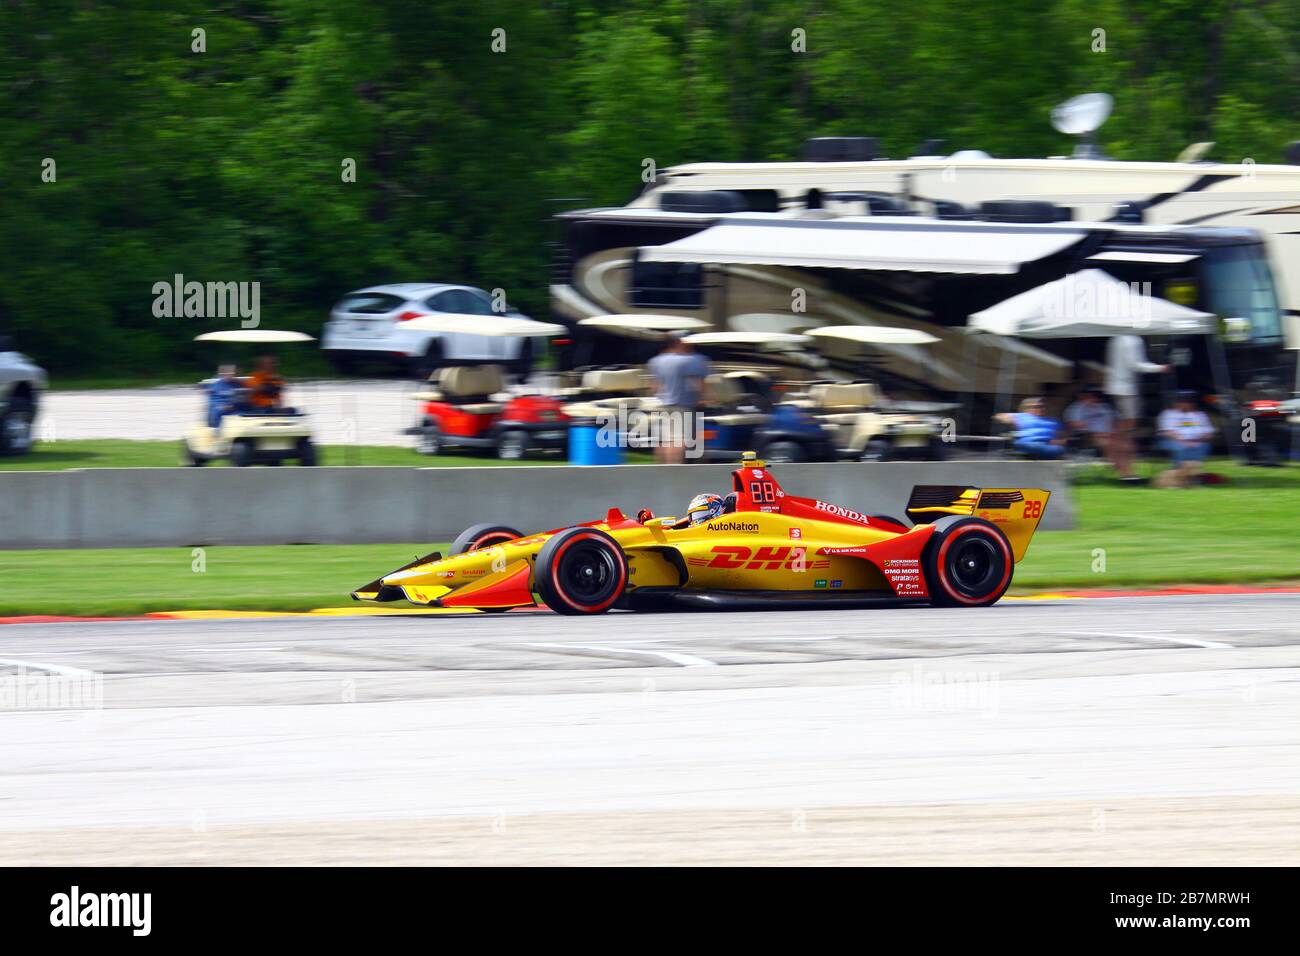 Elkhart Lake, Wisconsin - June 21, 2019: 28 Ryan Hunter-Reay, USA, Andretti Autosport, REV Group Grand Prix at Road America, on course for practice se Stock Photo